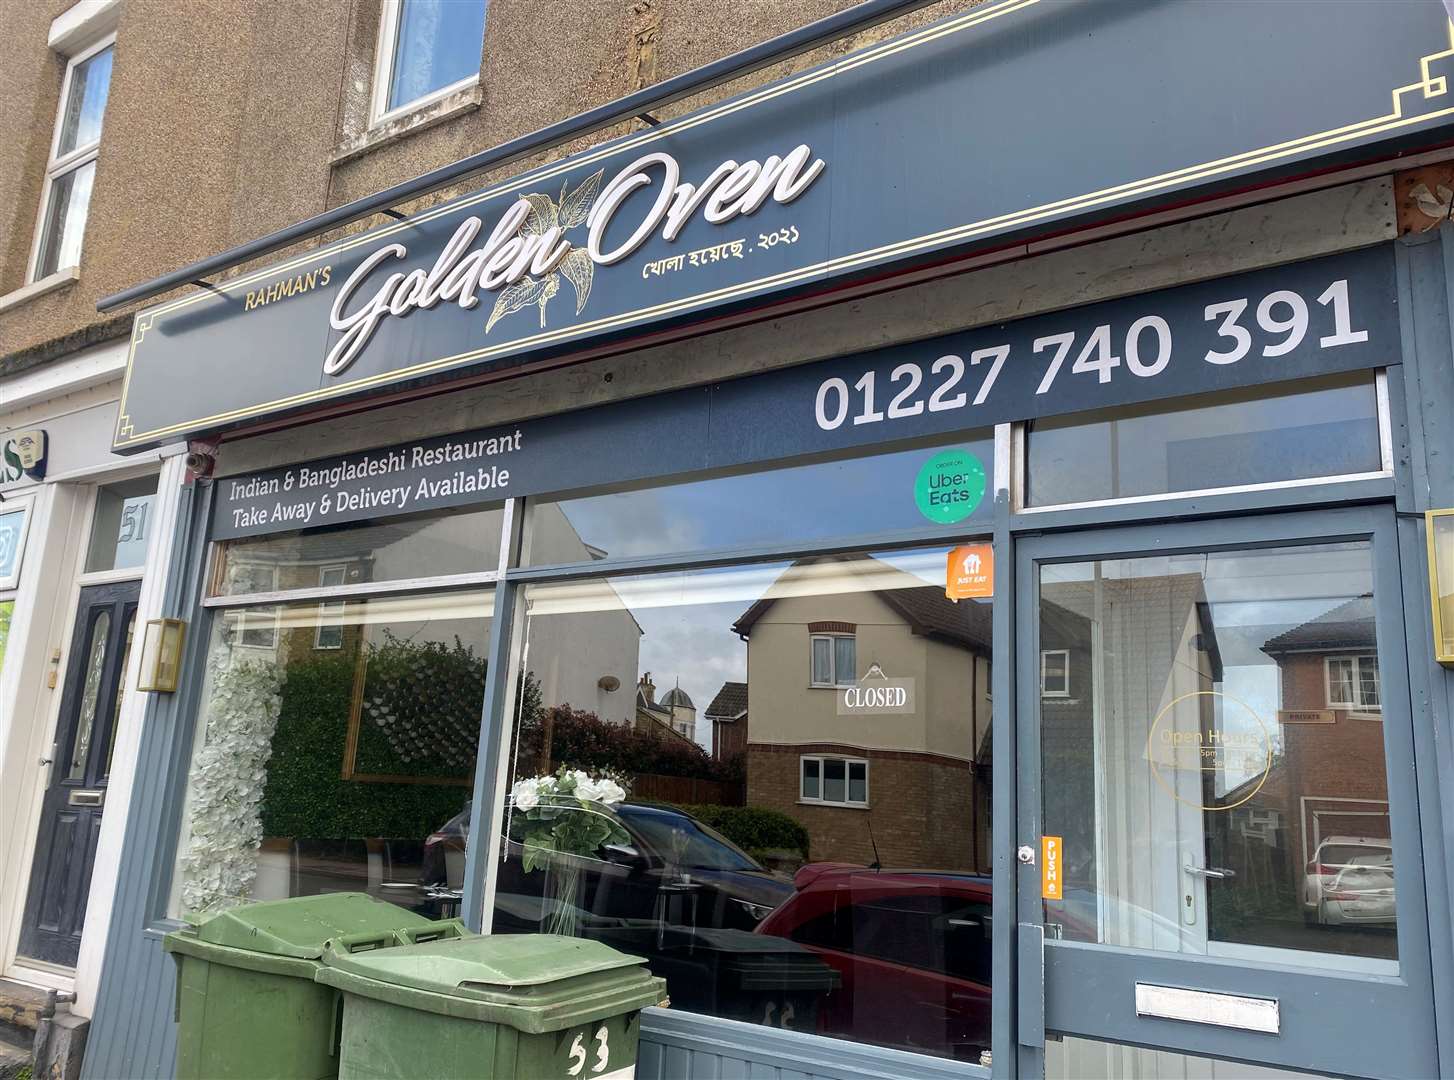 Rahman's Golden Oven now has a four-star food hygiene rating